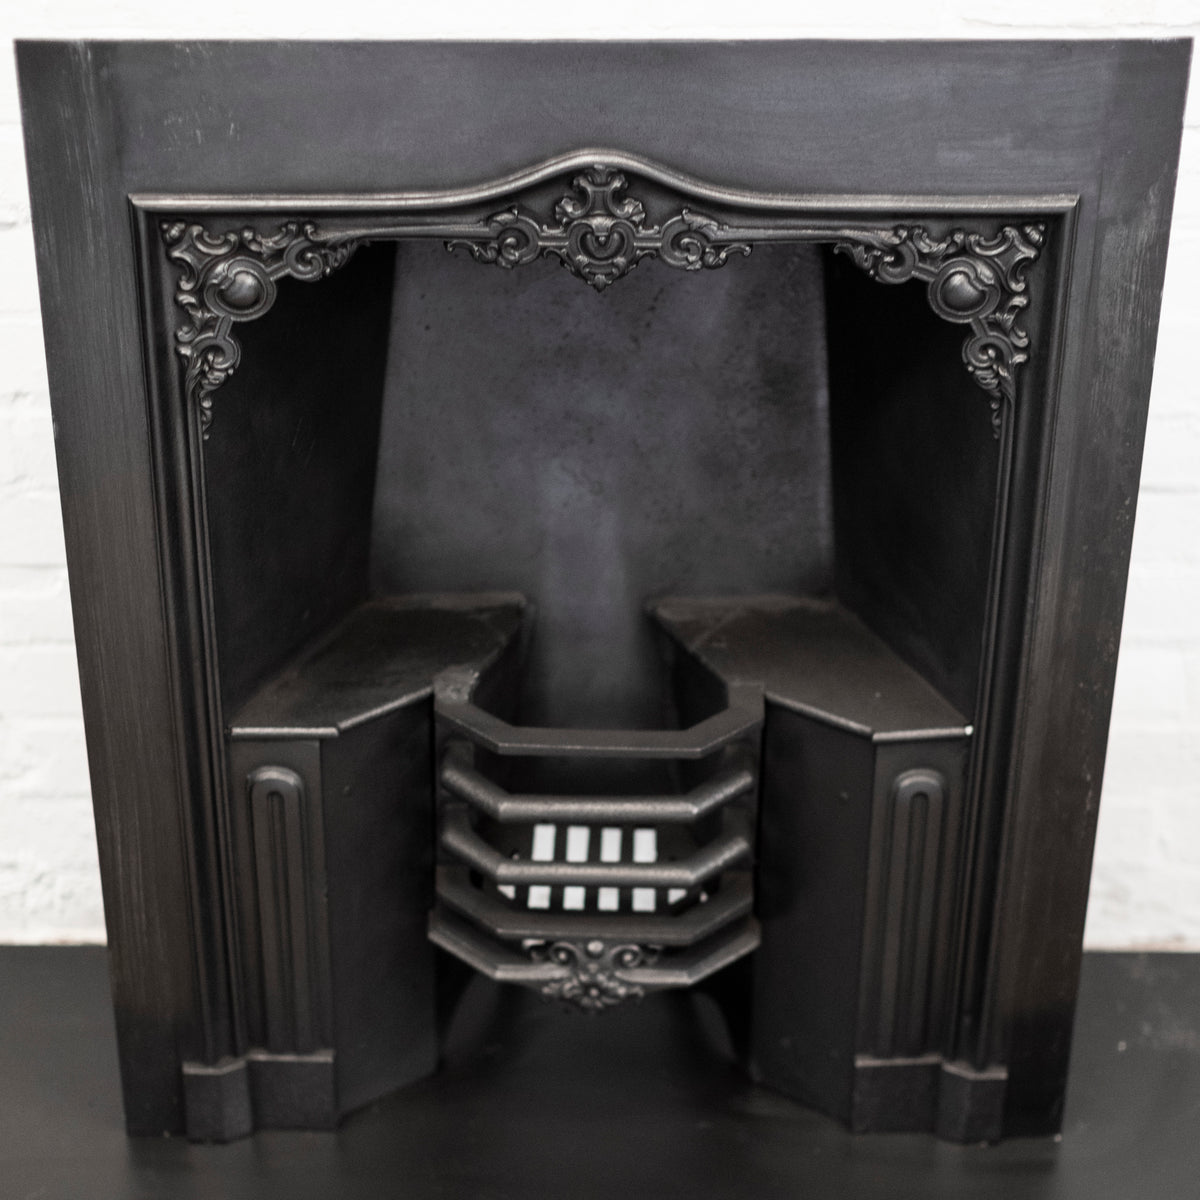 Antique Ornate Late Georgian / Early Victorian Cast Iron Insert | The Architectural Forum